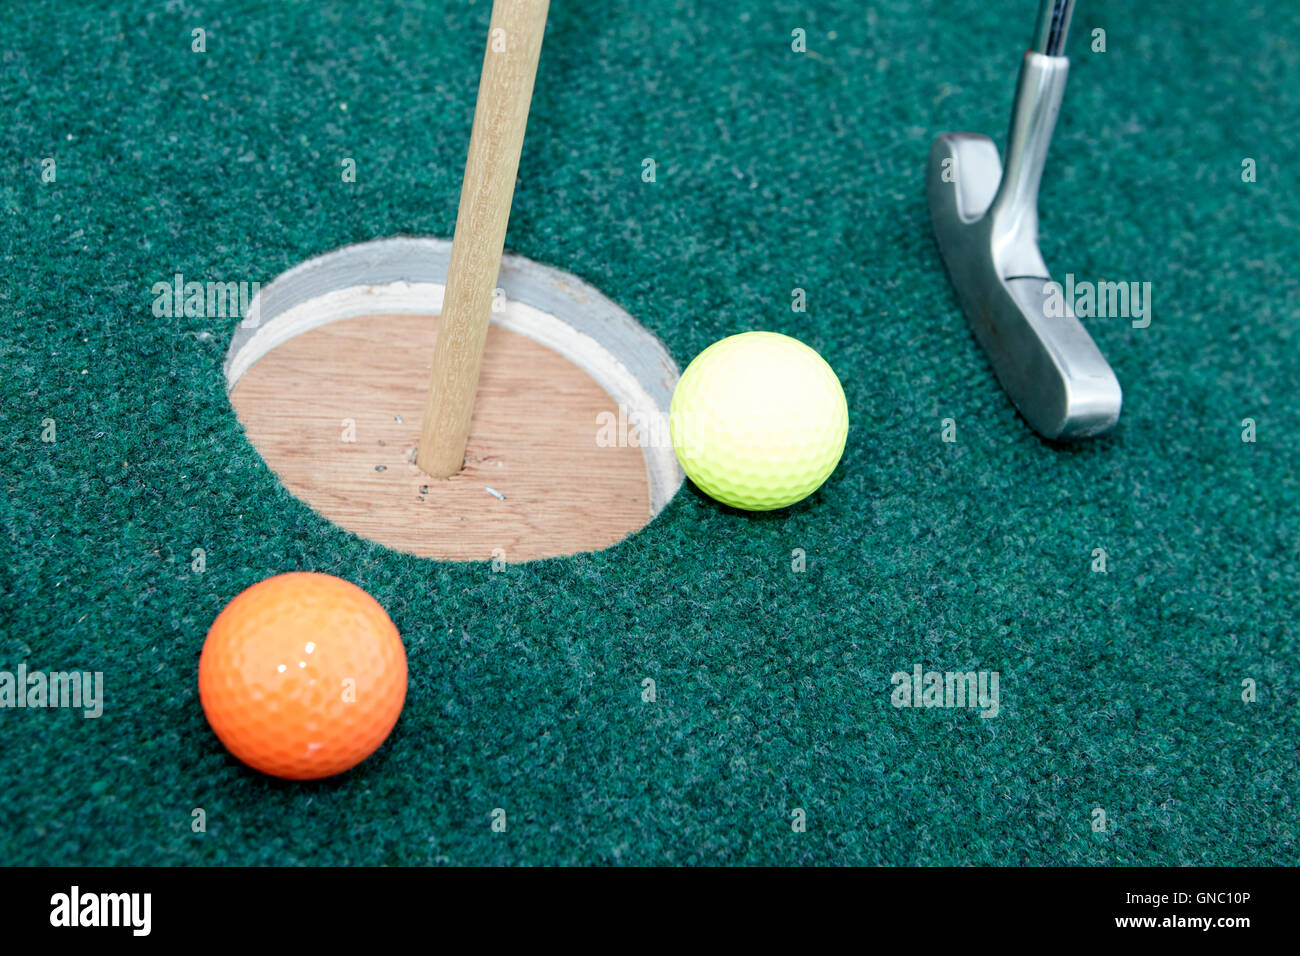 balls and golf putter on home made crazy golf hole Stock Photo